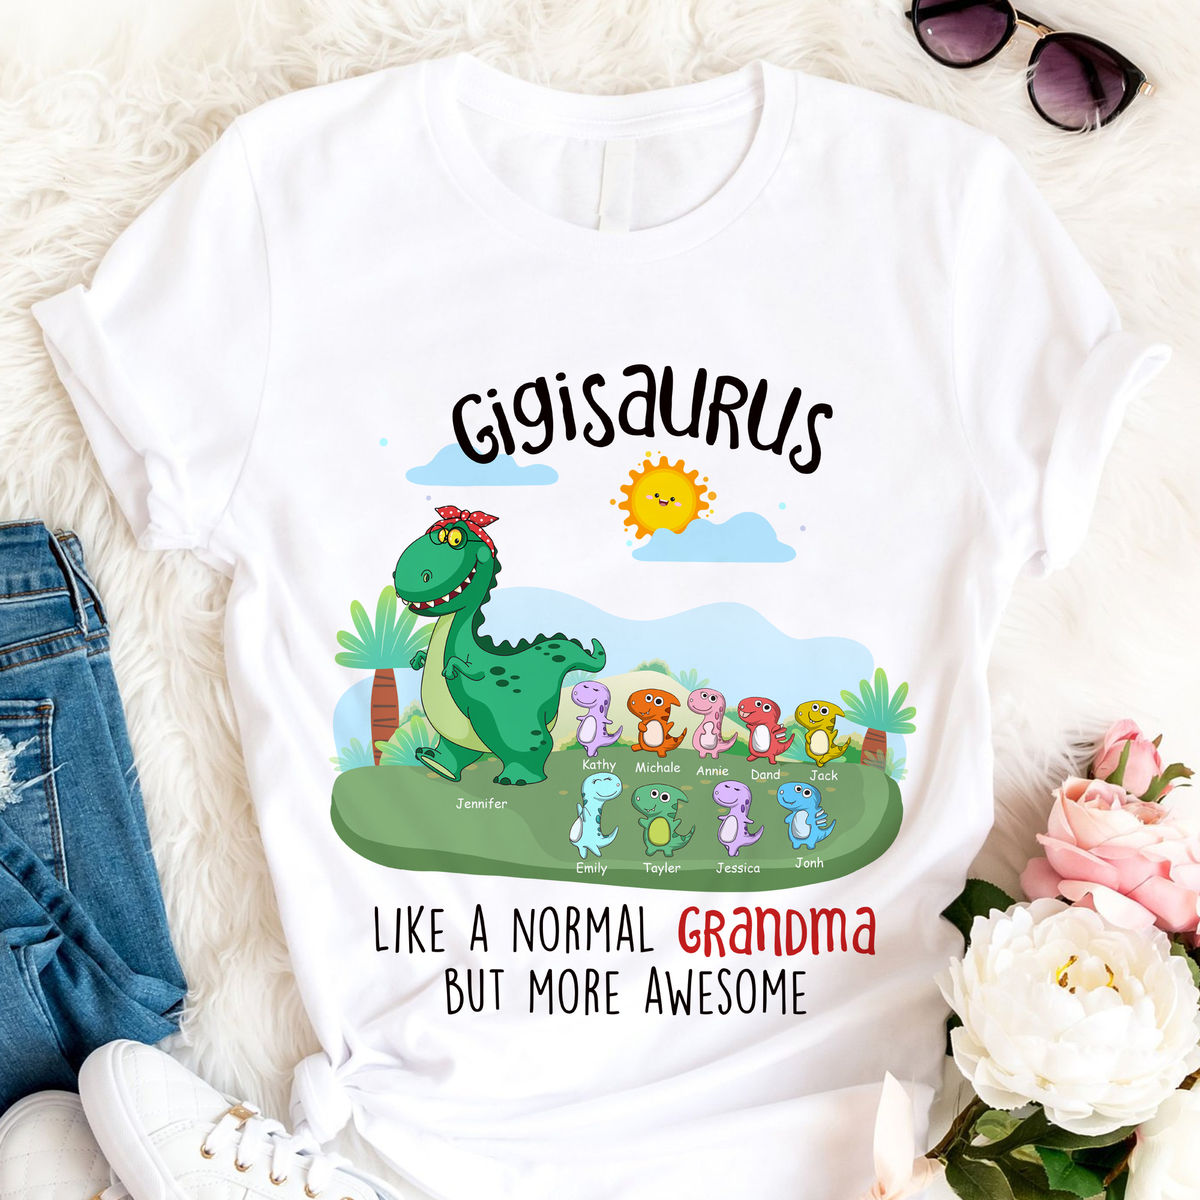 Grandkid - Gigisaurus Like a normal Grandma but more awesome - Mother's Day Gifts, Gifts For Mother, Grandma - Personalized Shirt